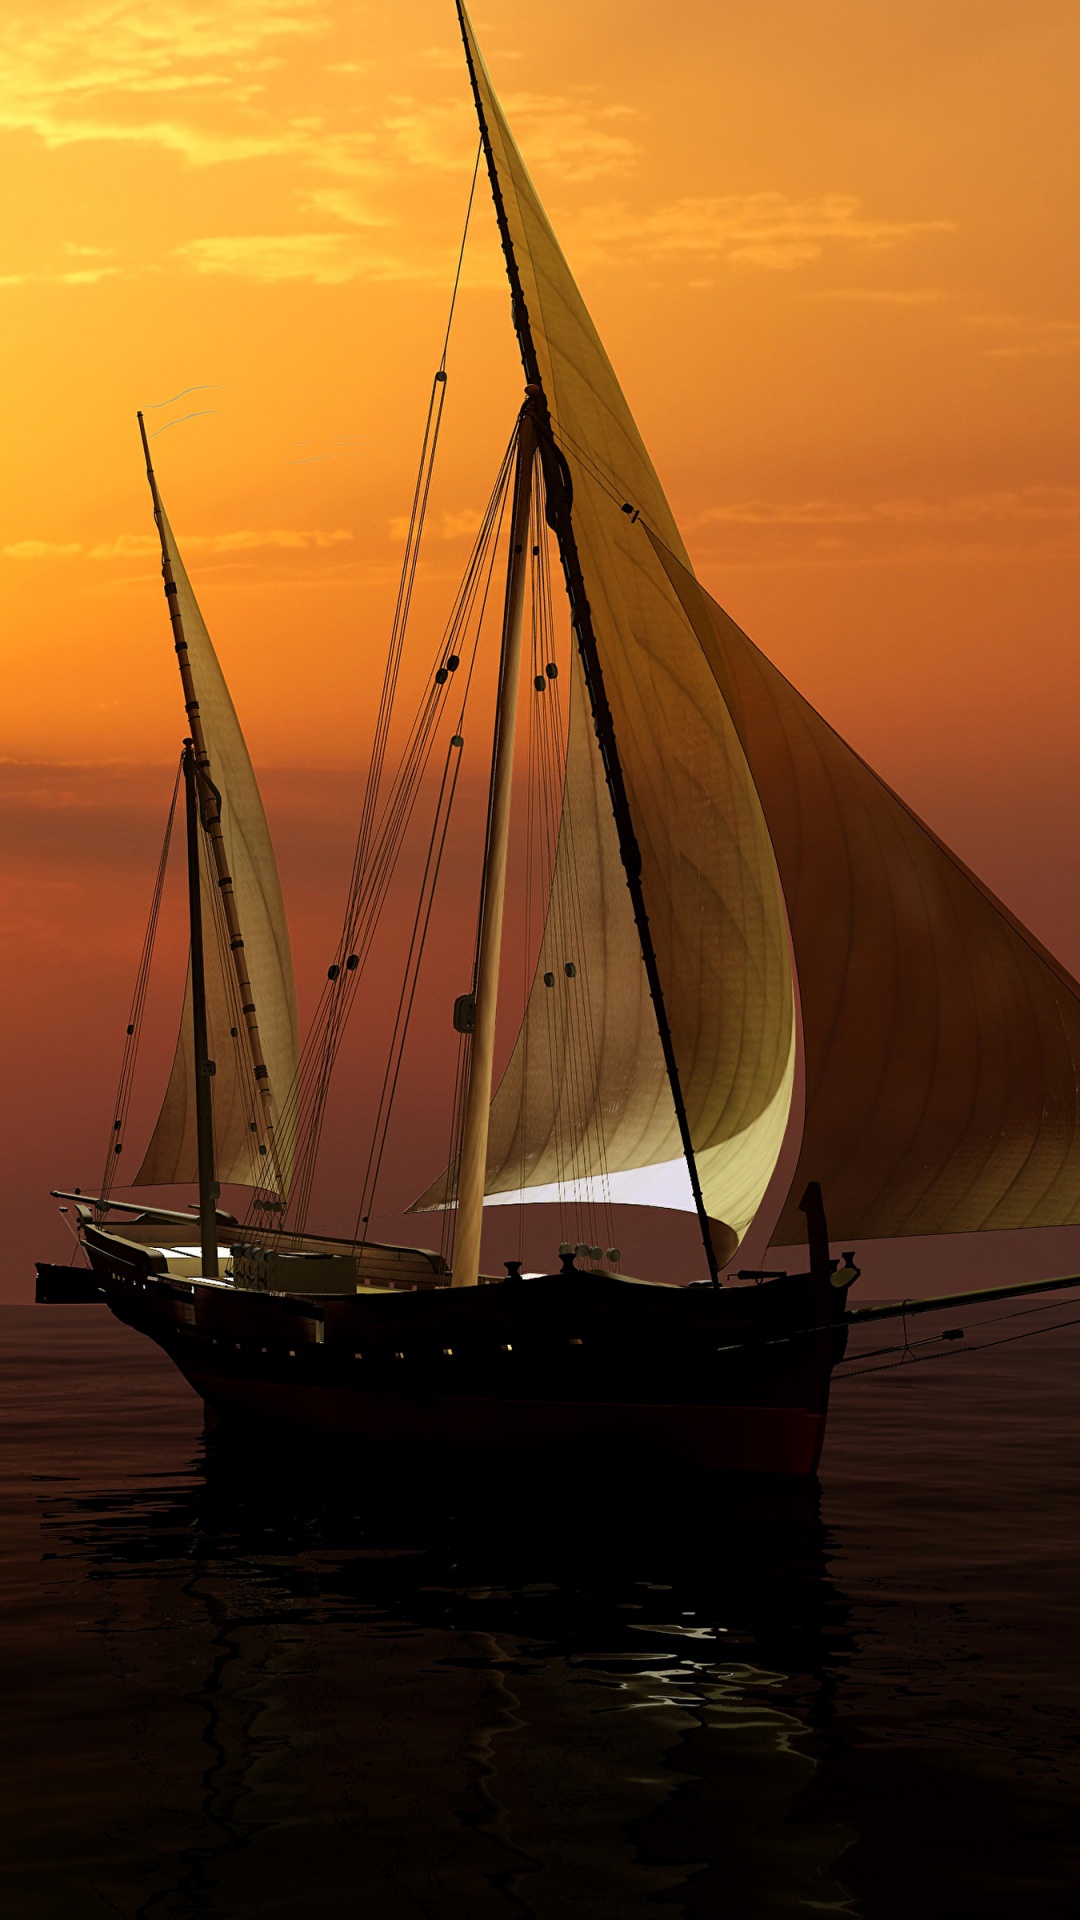 Silhouette of Boat on Sea During Sunset. Wallpaper in 1080x1920 Resolution